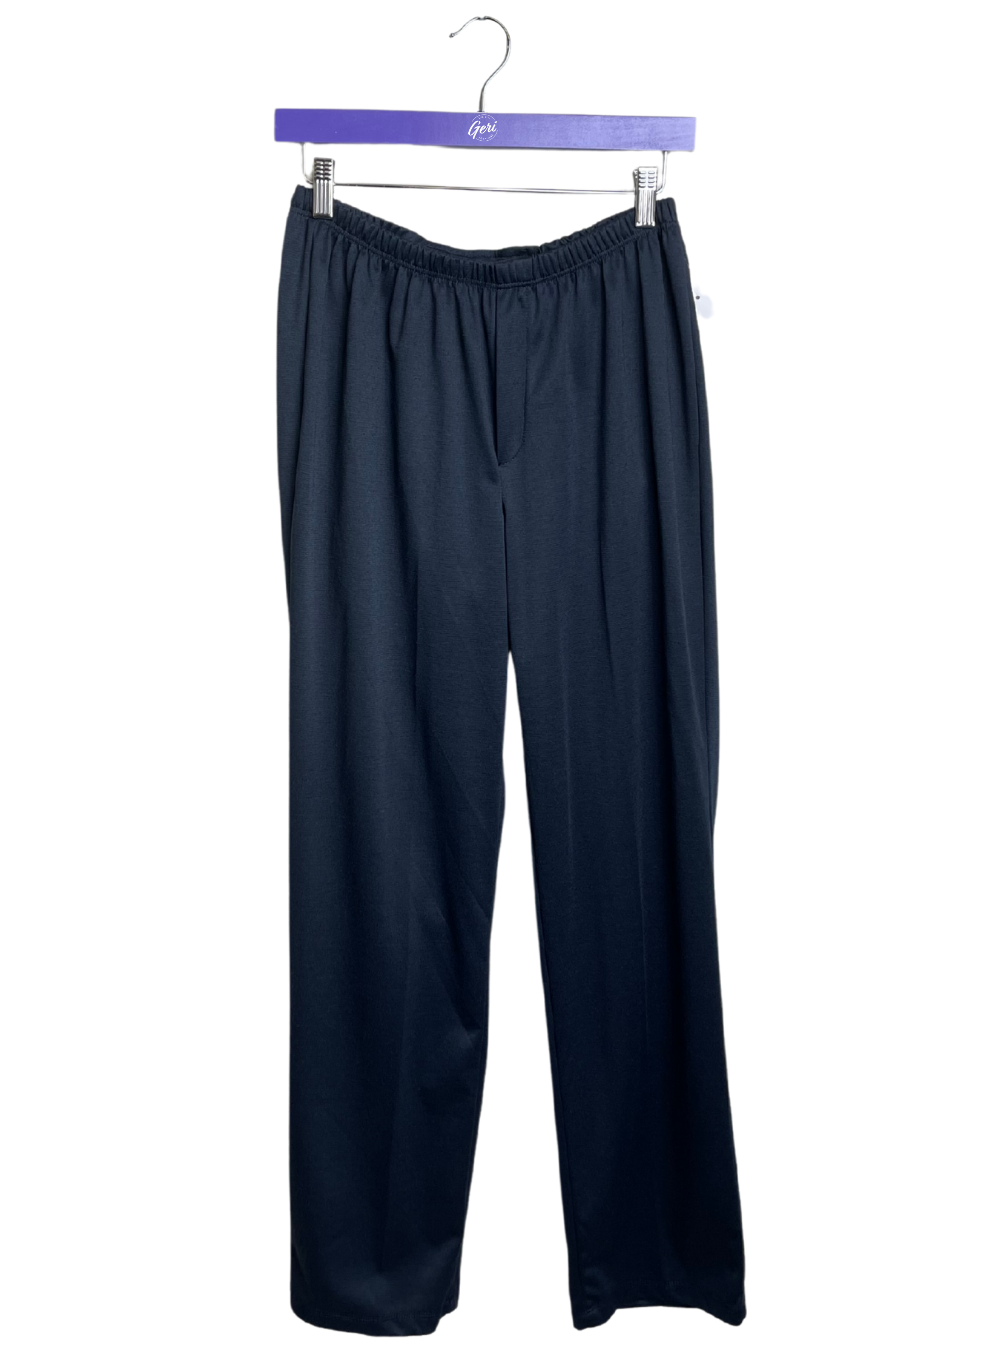 Men's Velcro Adaptive Pajamas with Magnetic Fly and Removable Drawstring  Waist Buy Online – Willie J's: The Easy PJ's